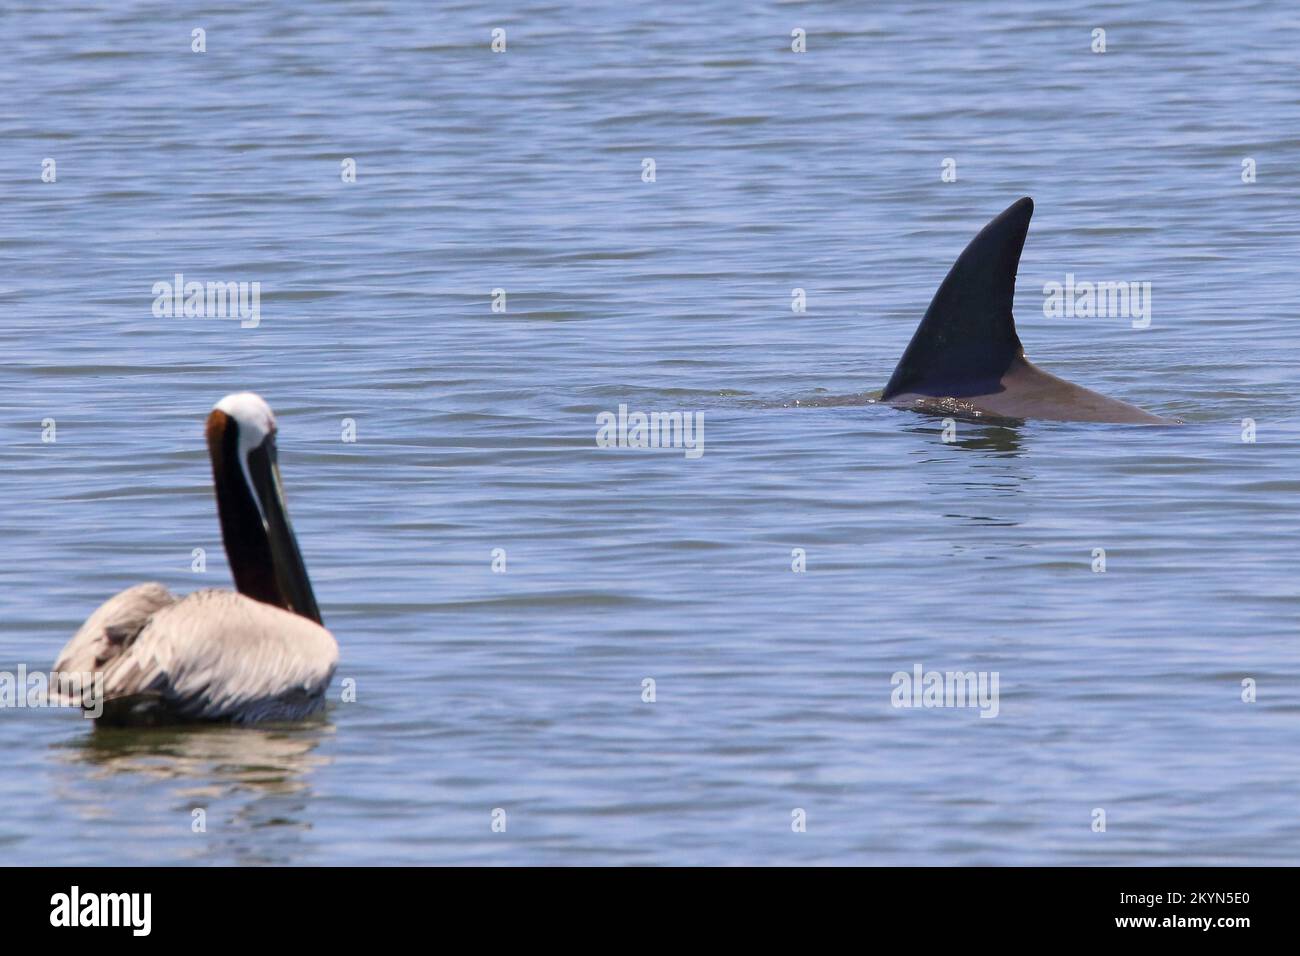 Dolphin teasing a pelican by swimming right up to it Stock Photo